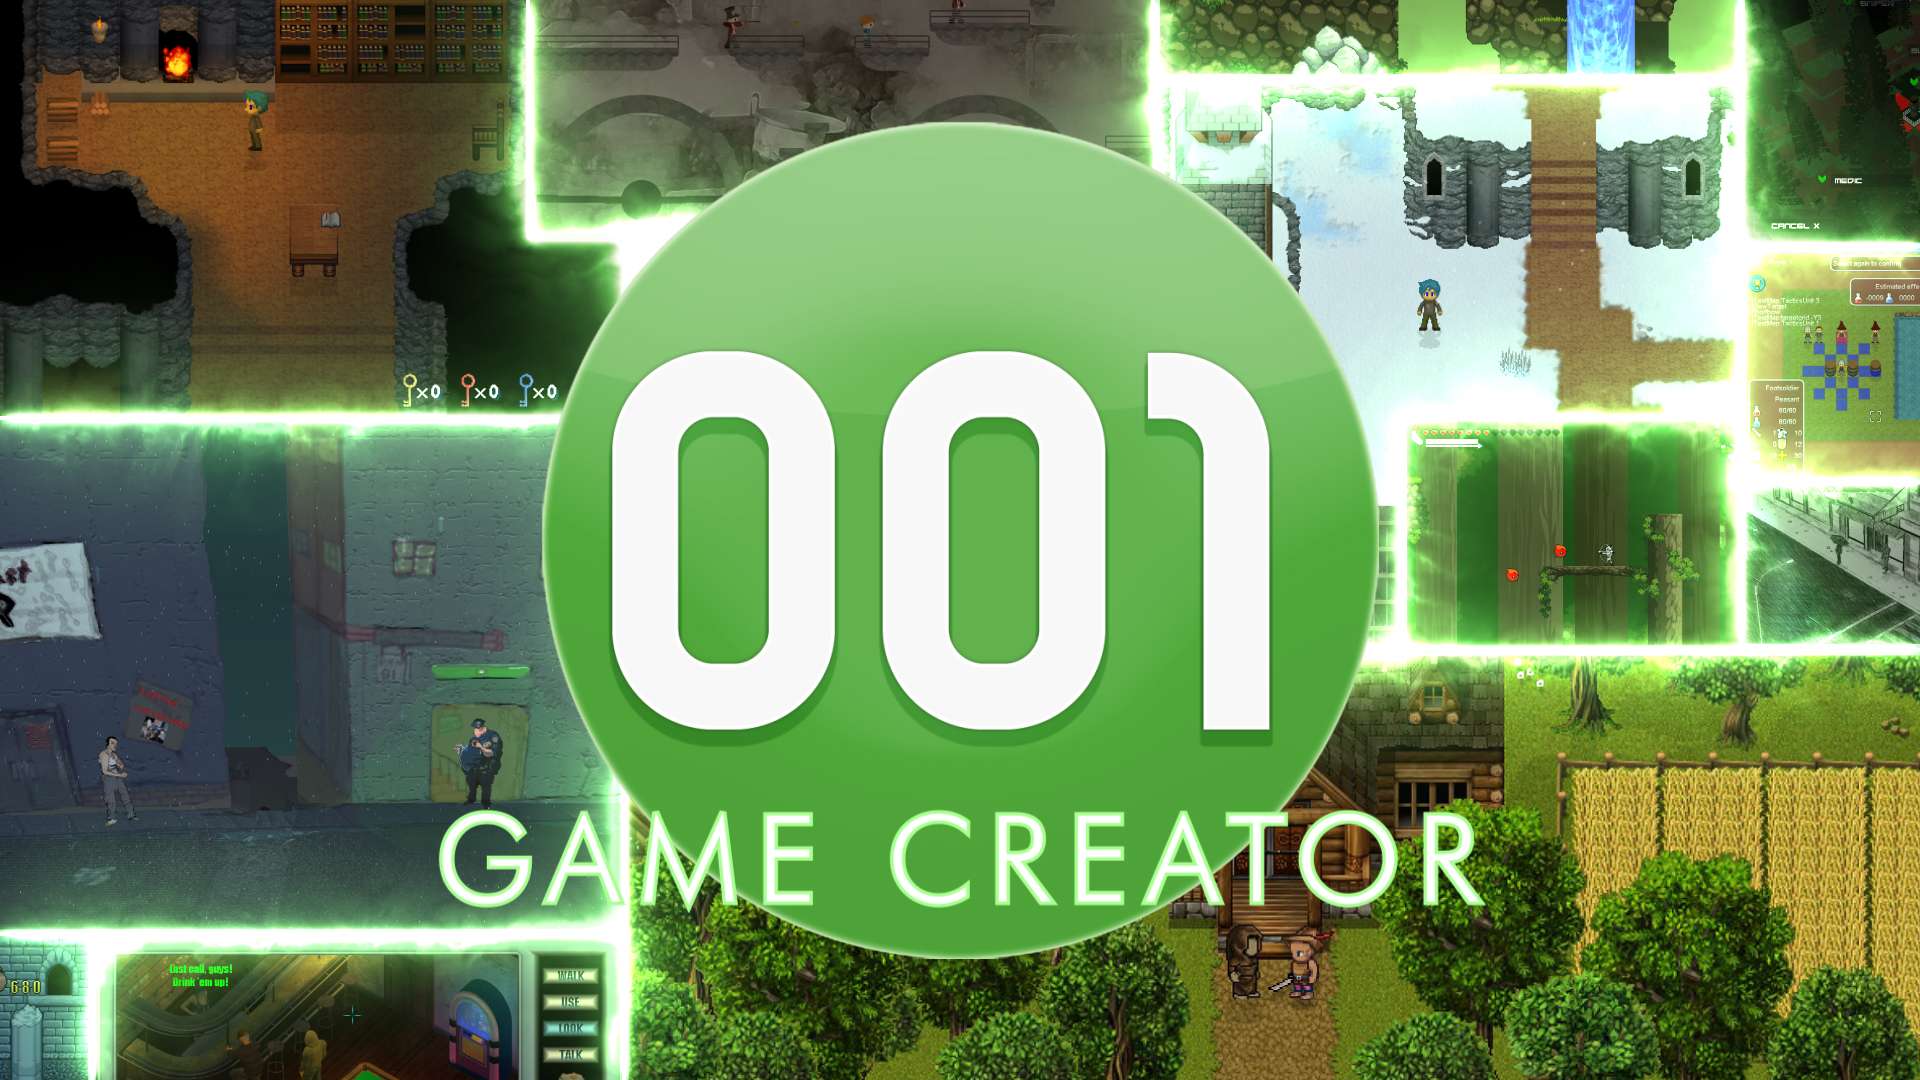 Free Game Maker Software :: 001 Game Creator :: Home